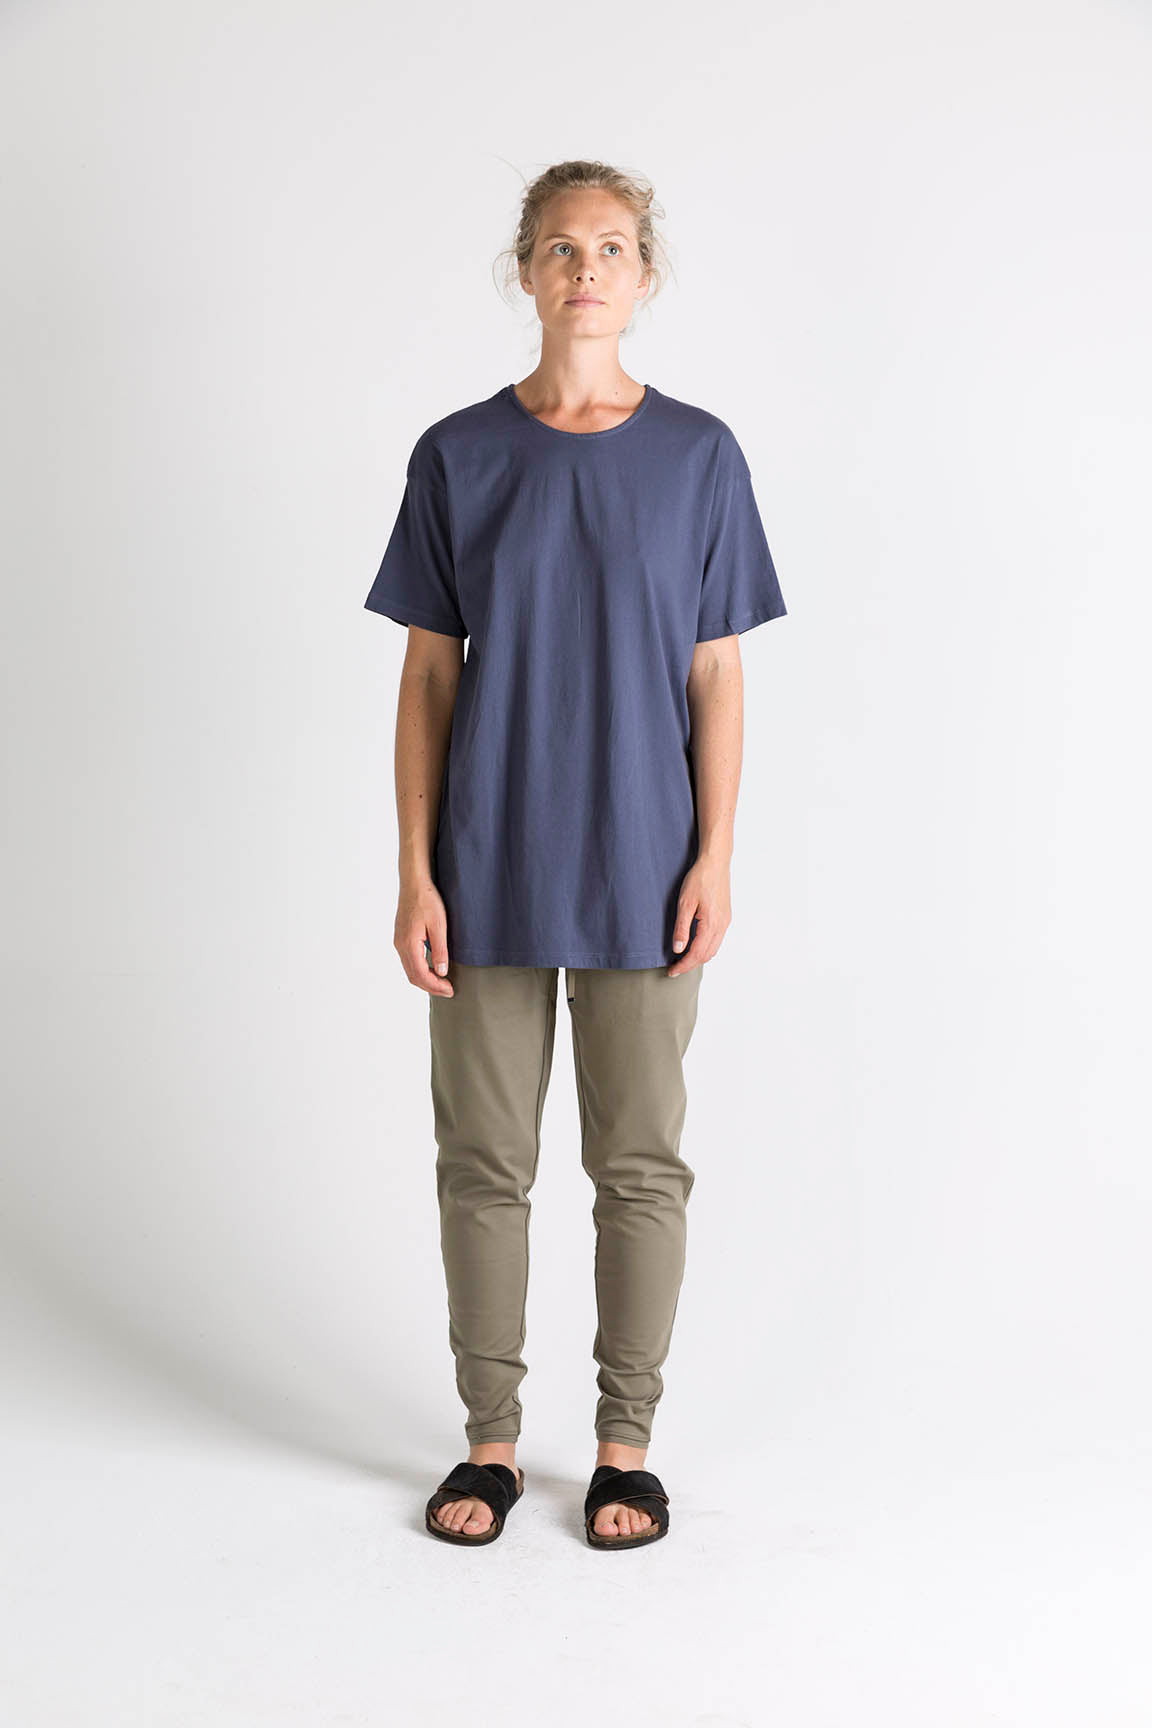 Ophelia and Ryder Crew Neck T-shirt